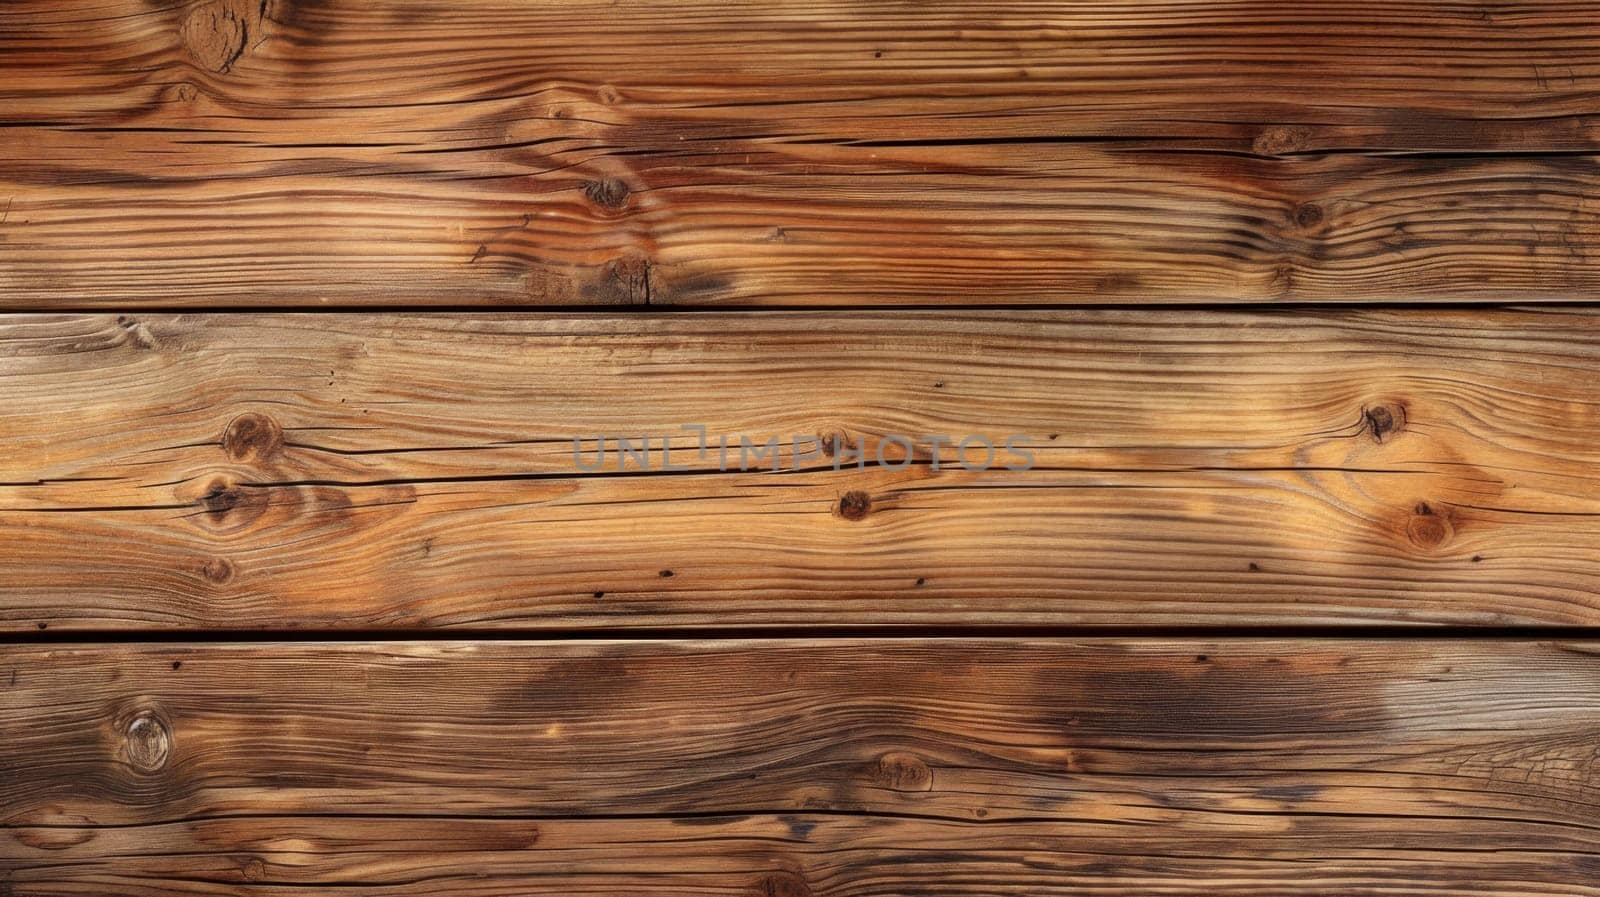 Shabby wooden background texture surface. Copy space.